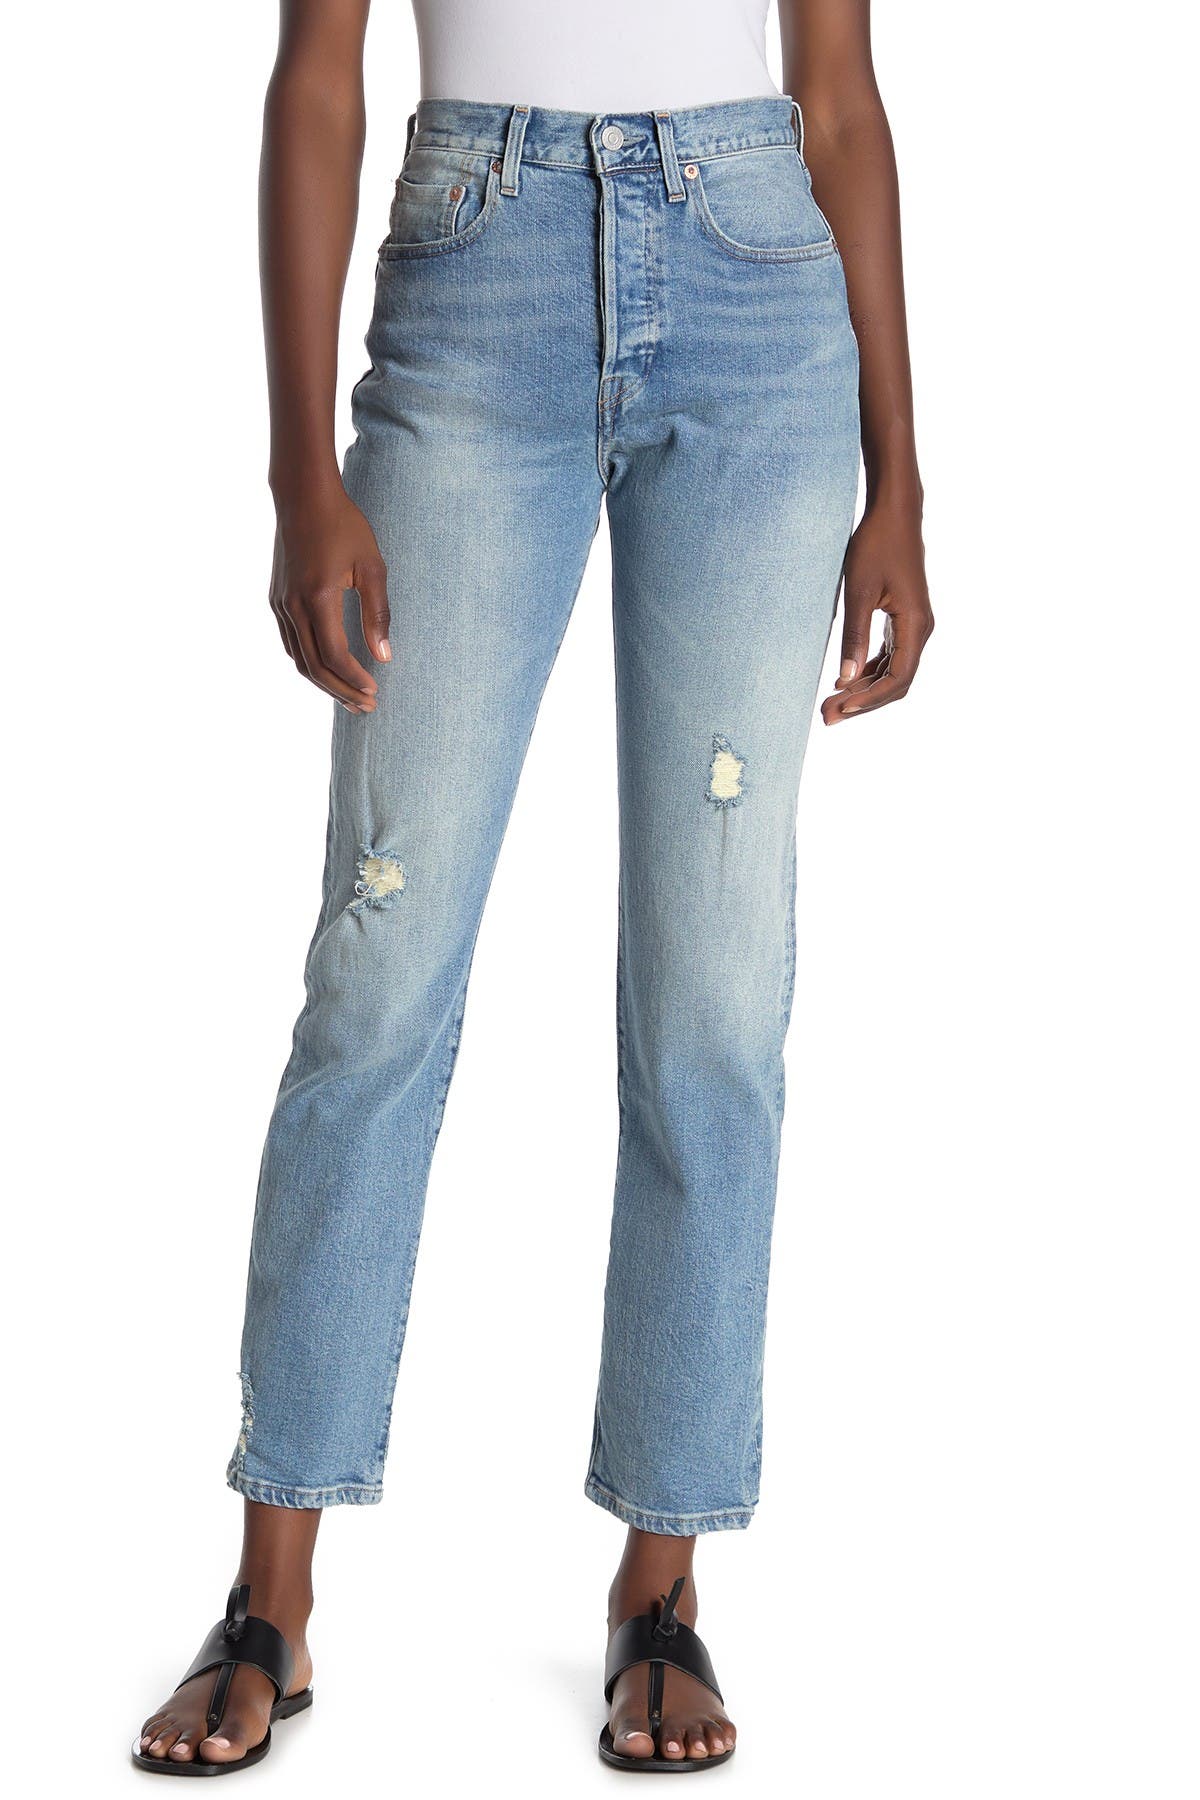 levi high waisted distressed jeans